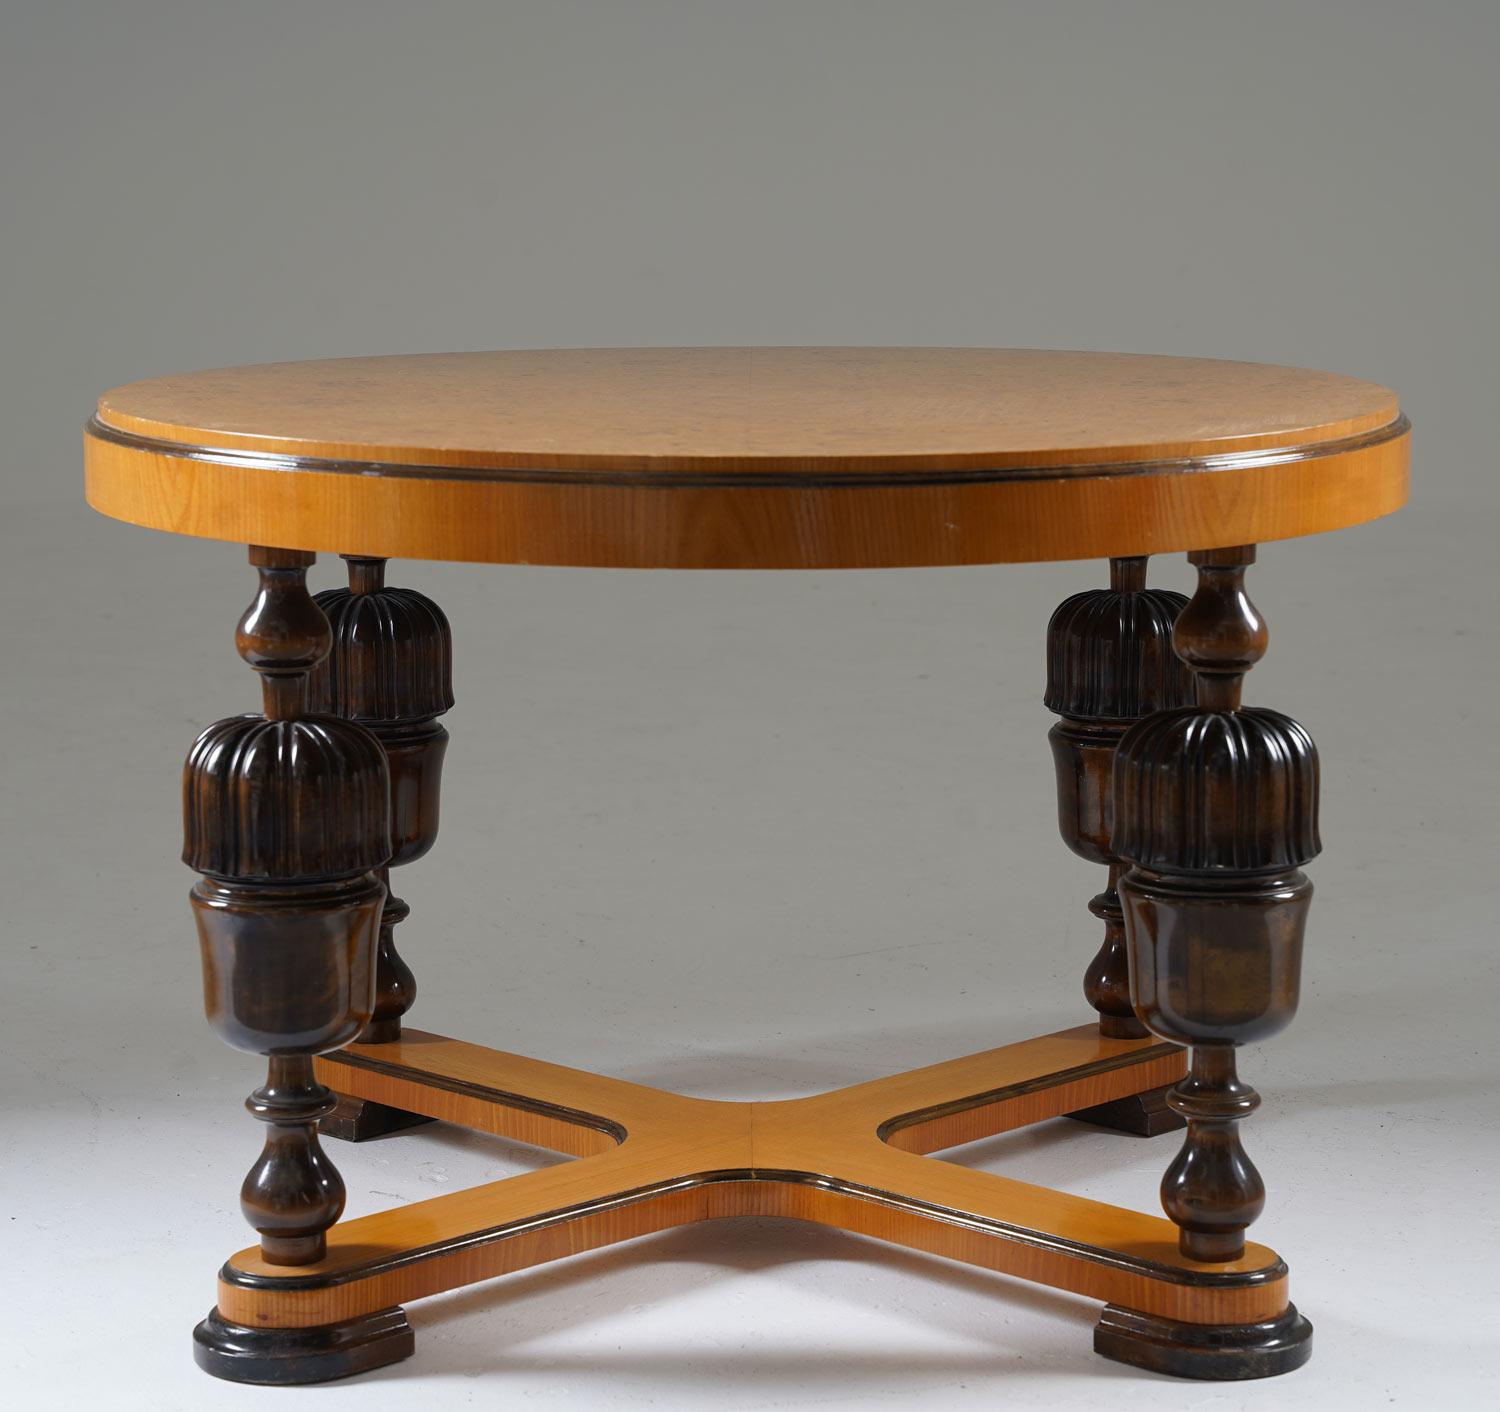 Elegant Swedish grace / Art Deco coffee table, produced in Sweden, 1930s.
This table features a thick circular table top in elm root veneer. The table top is supported by four richly decorated legs, connected by a cross at the bottom.

Condition: